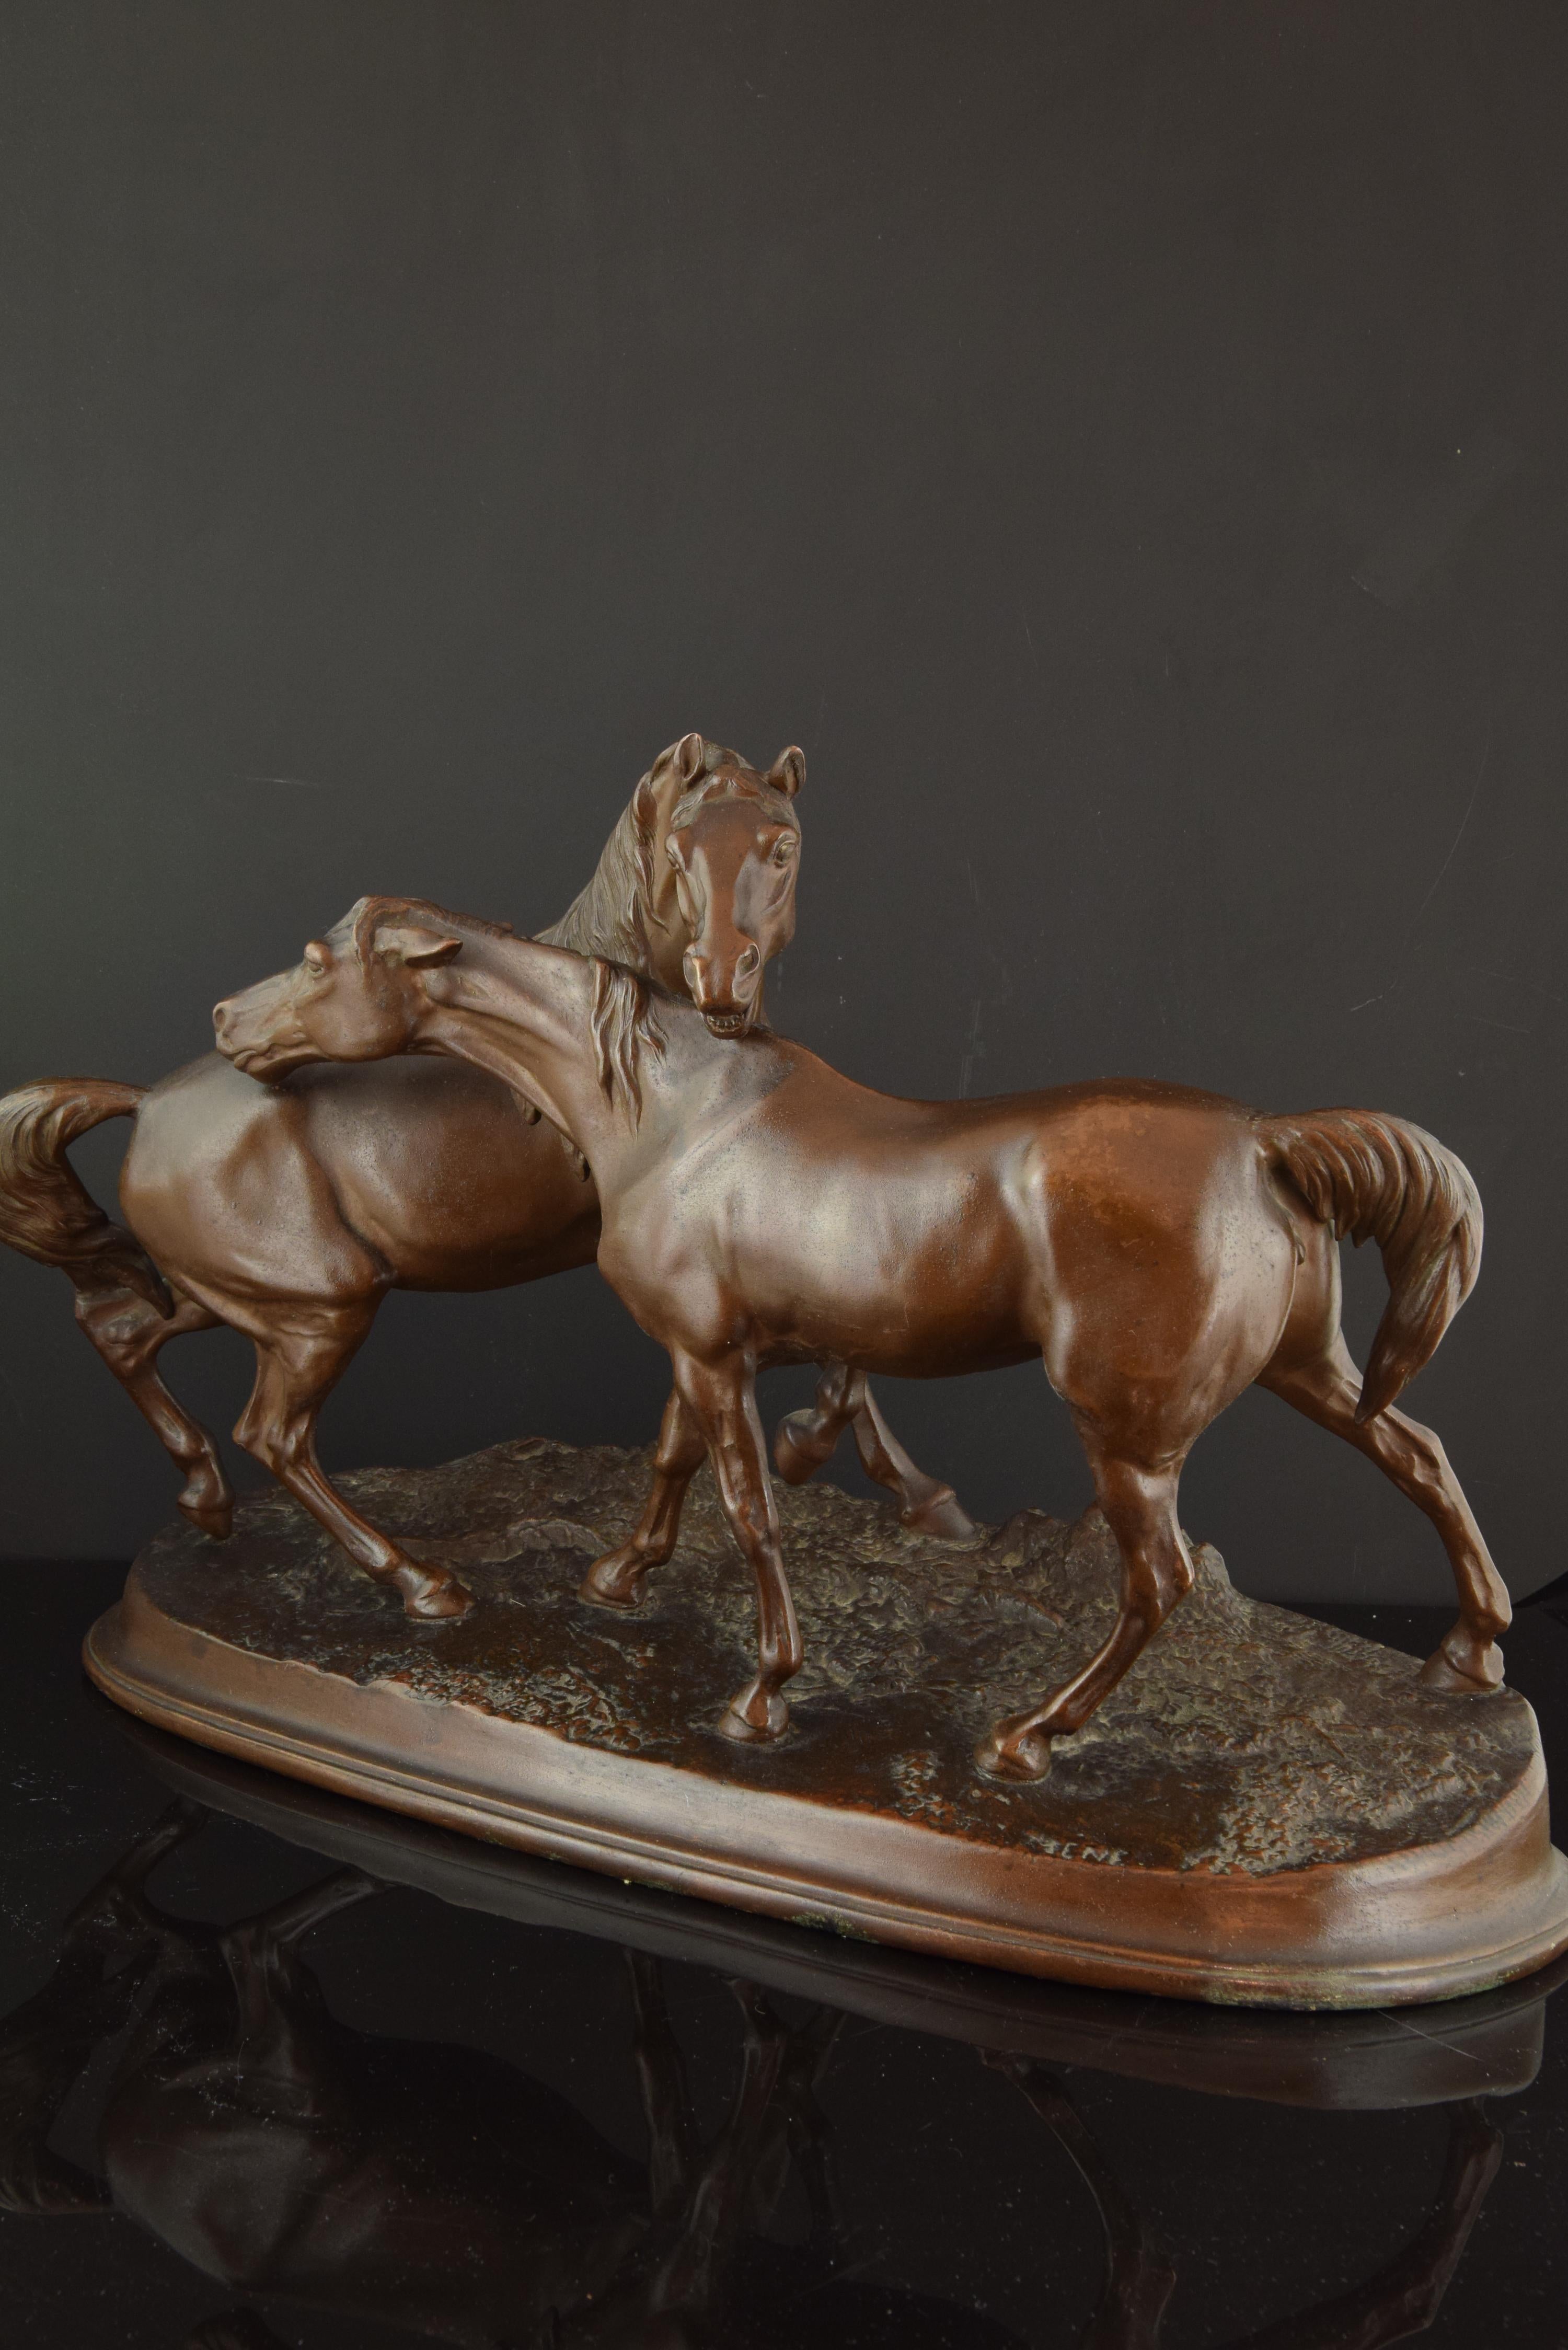 This sculpture, shows two horses, reflecting with remarkable perfection details of the mane and animal anatomy. The signature on the base refers to the origin of the sculpture, made in calamine. 
This work, done (the original) by Pierre-Jules Mene,